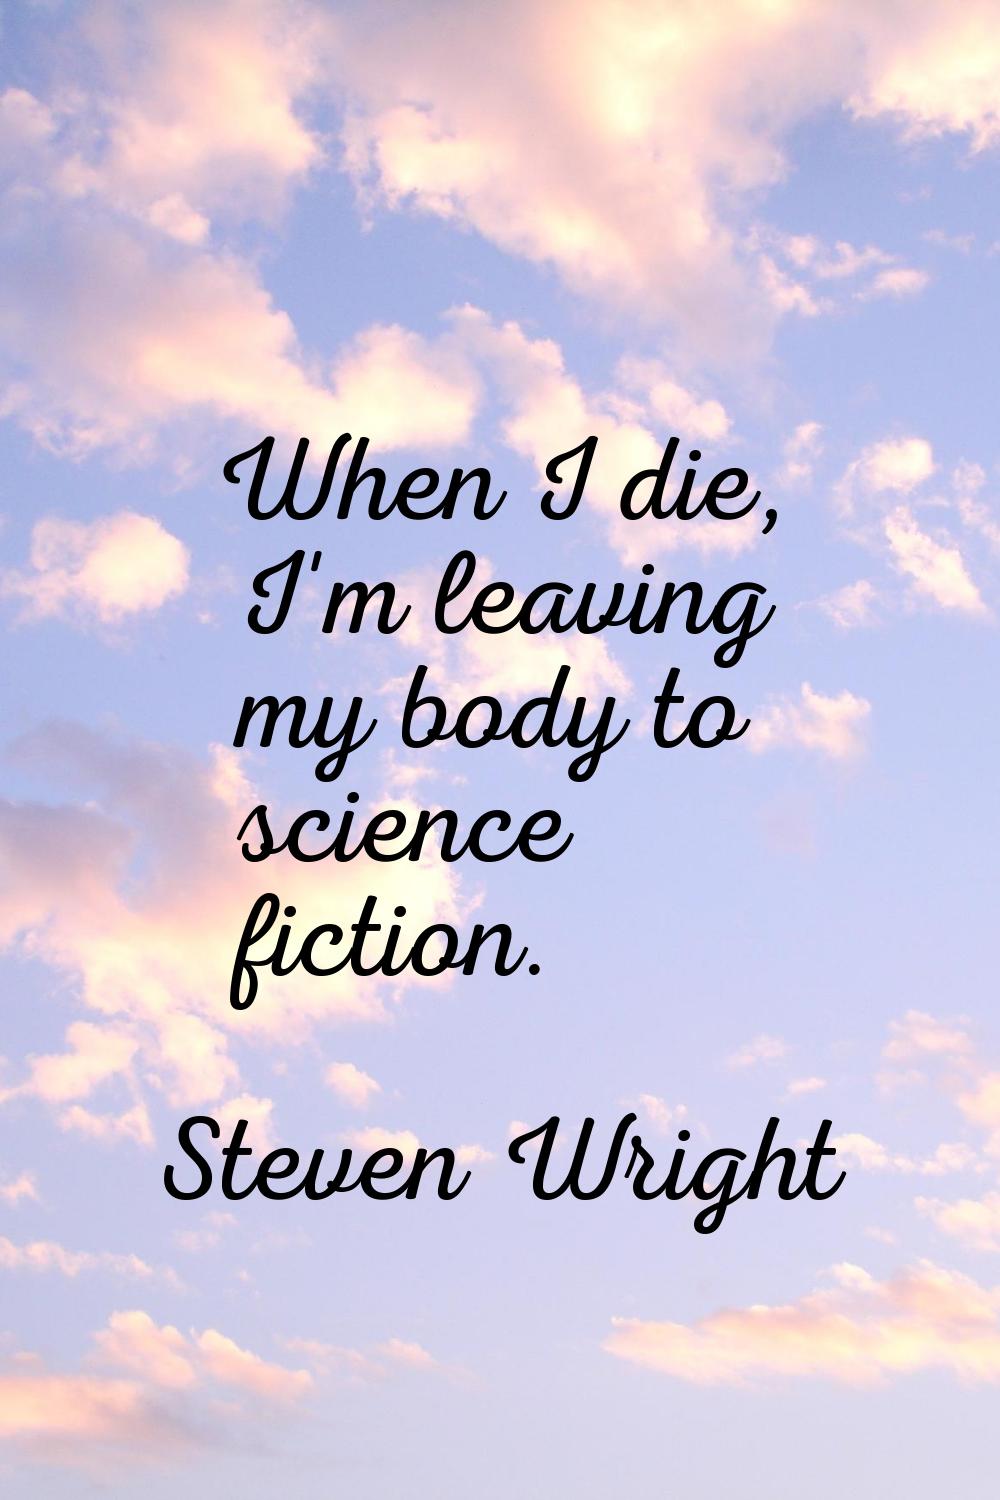 When I die, I'm leaving my body to science fiction.